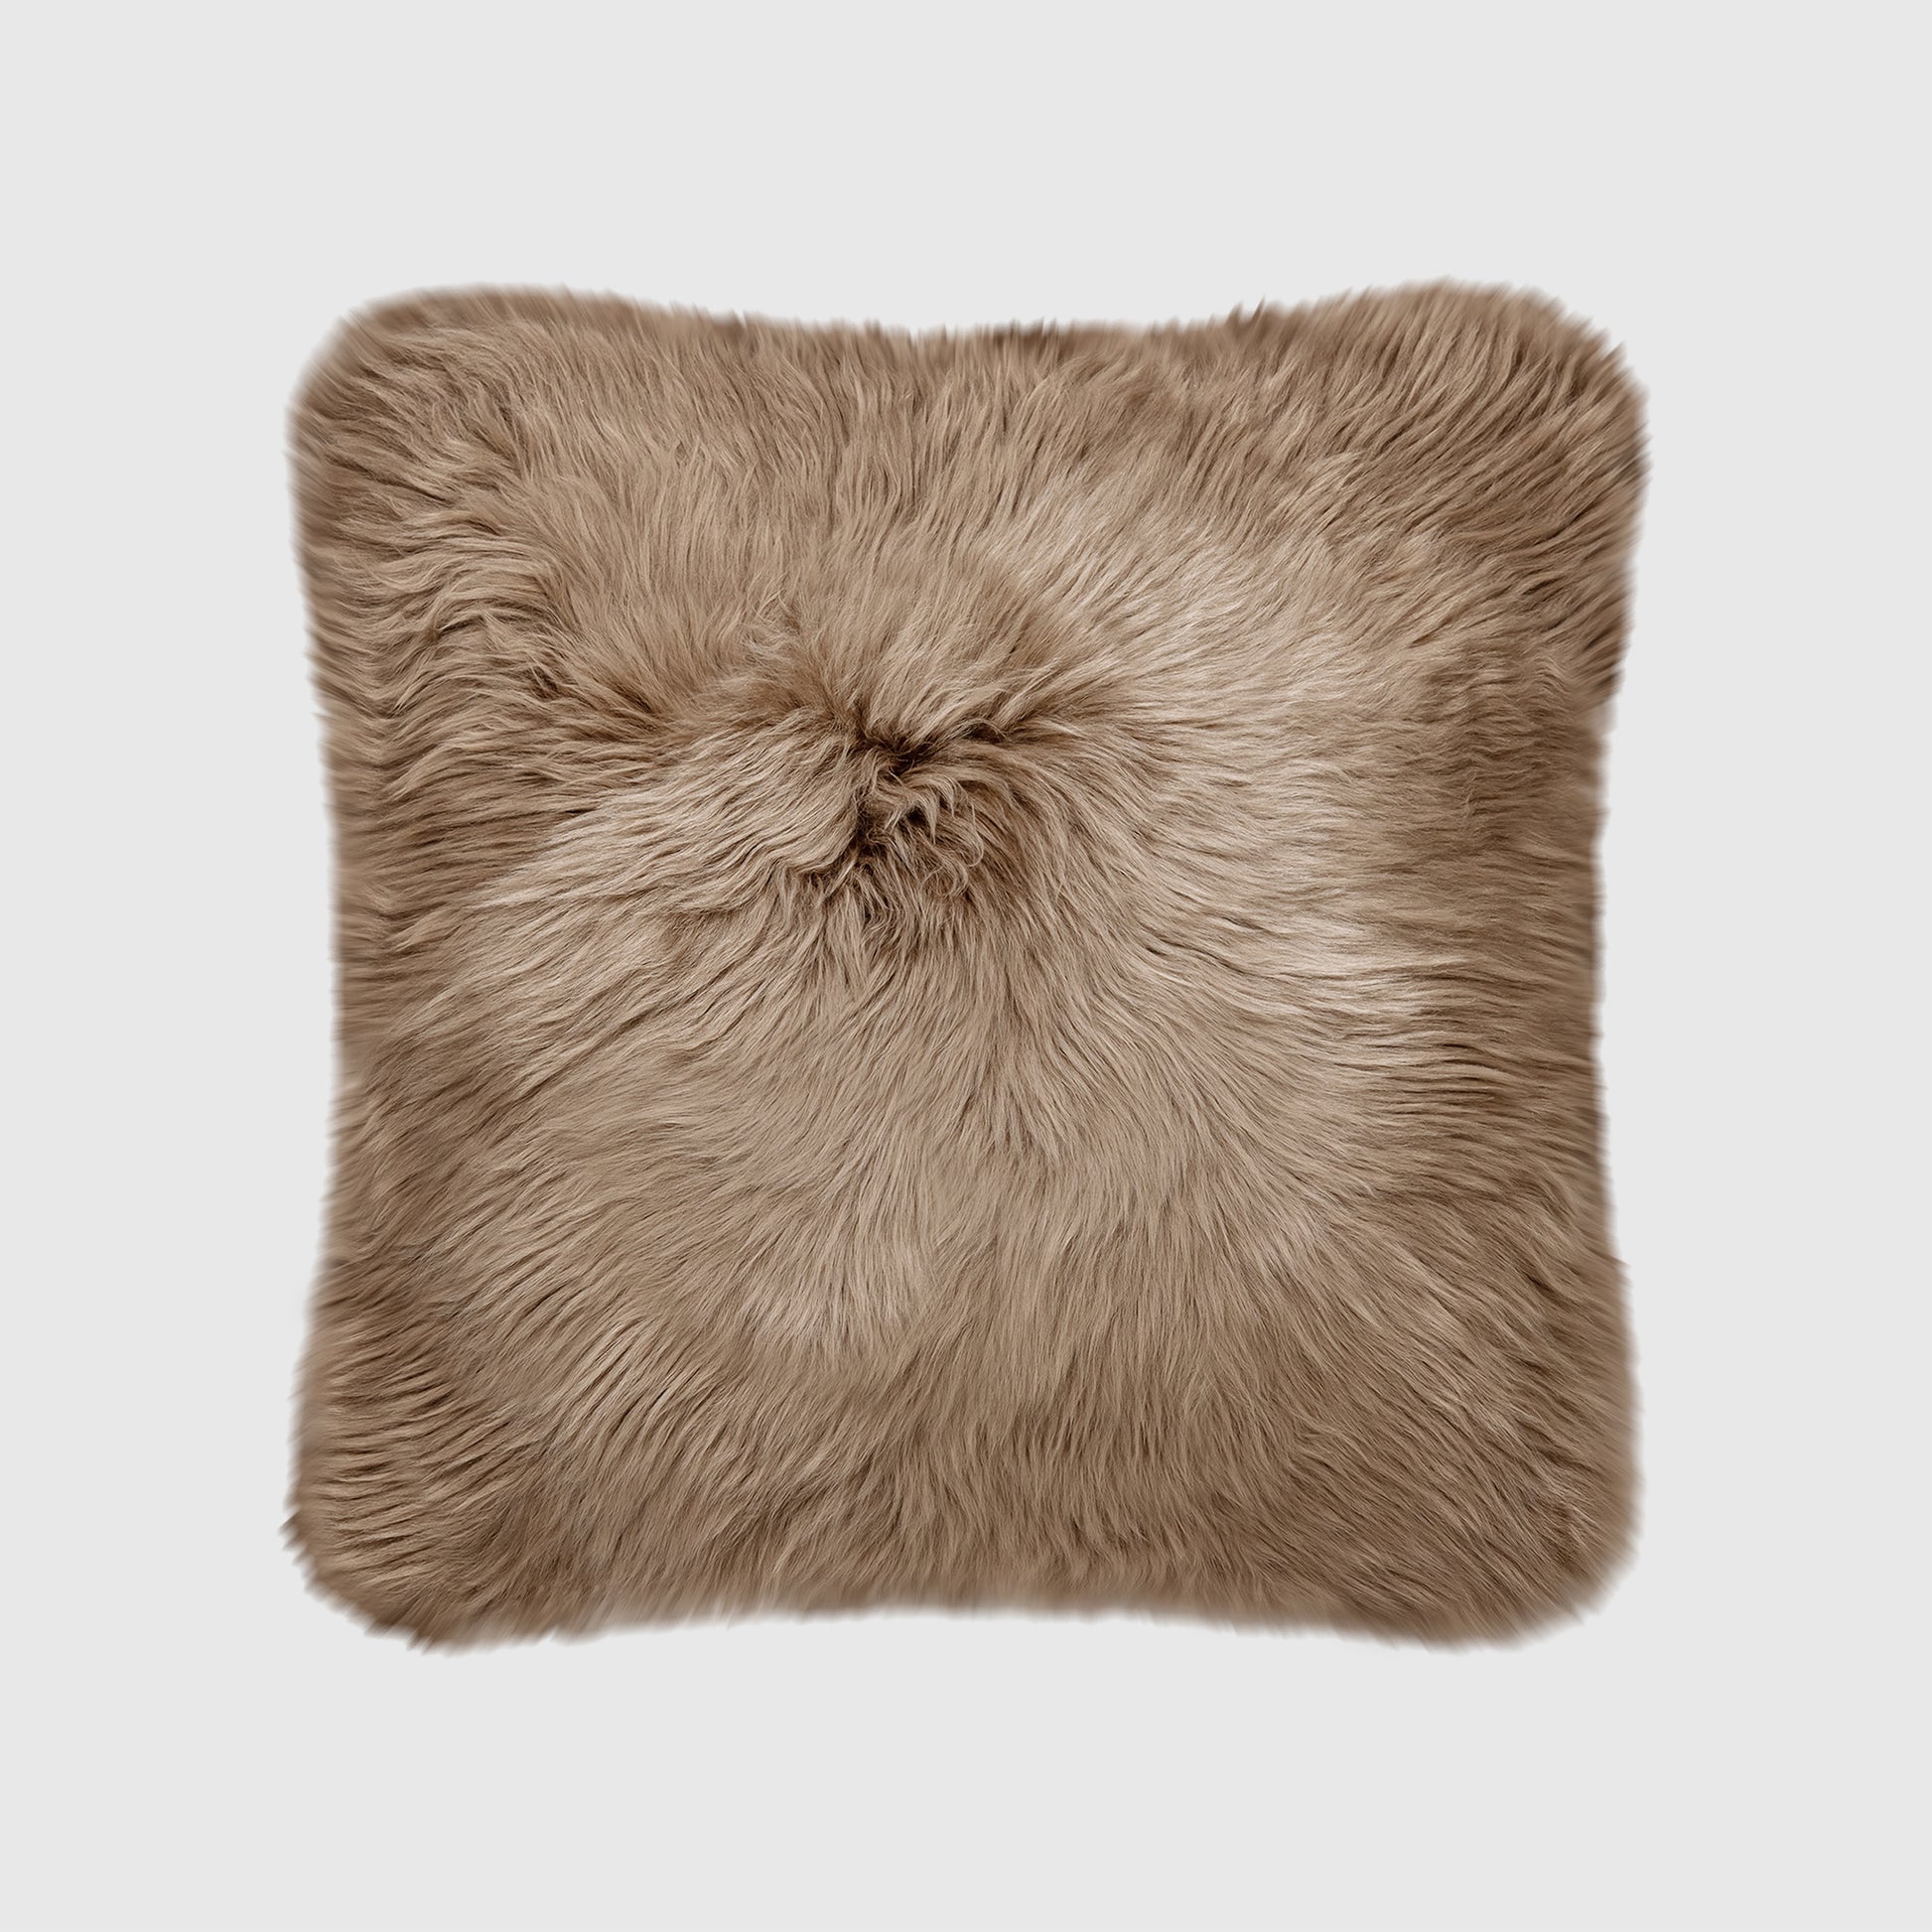 The Mood | Charlie Sheepskin Double-sided 18"x18" Pillow, Toffee